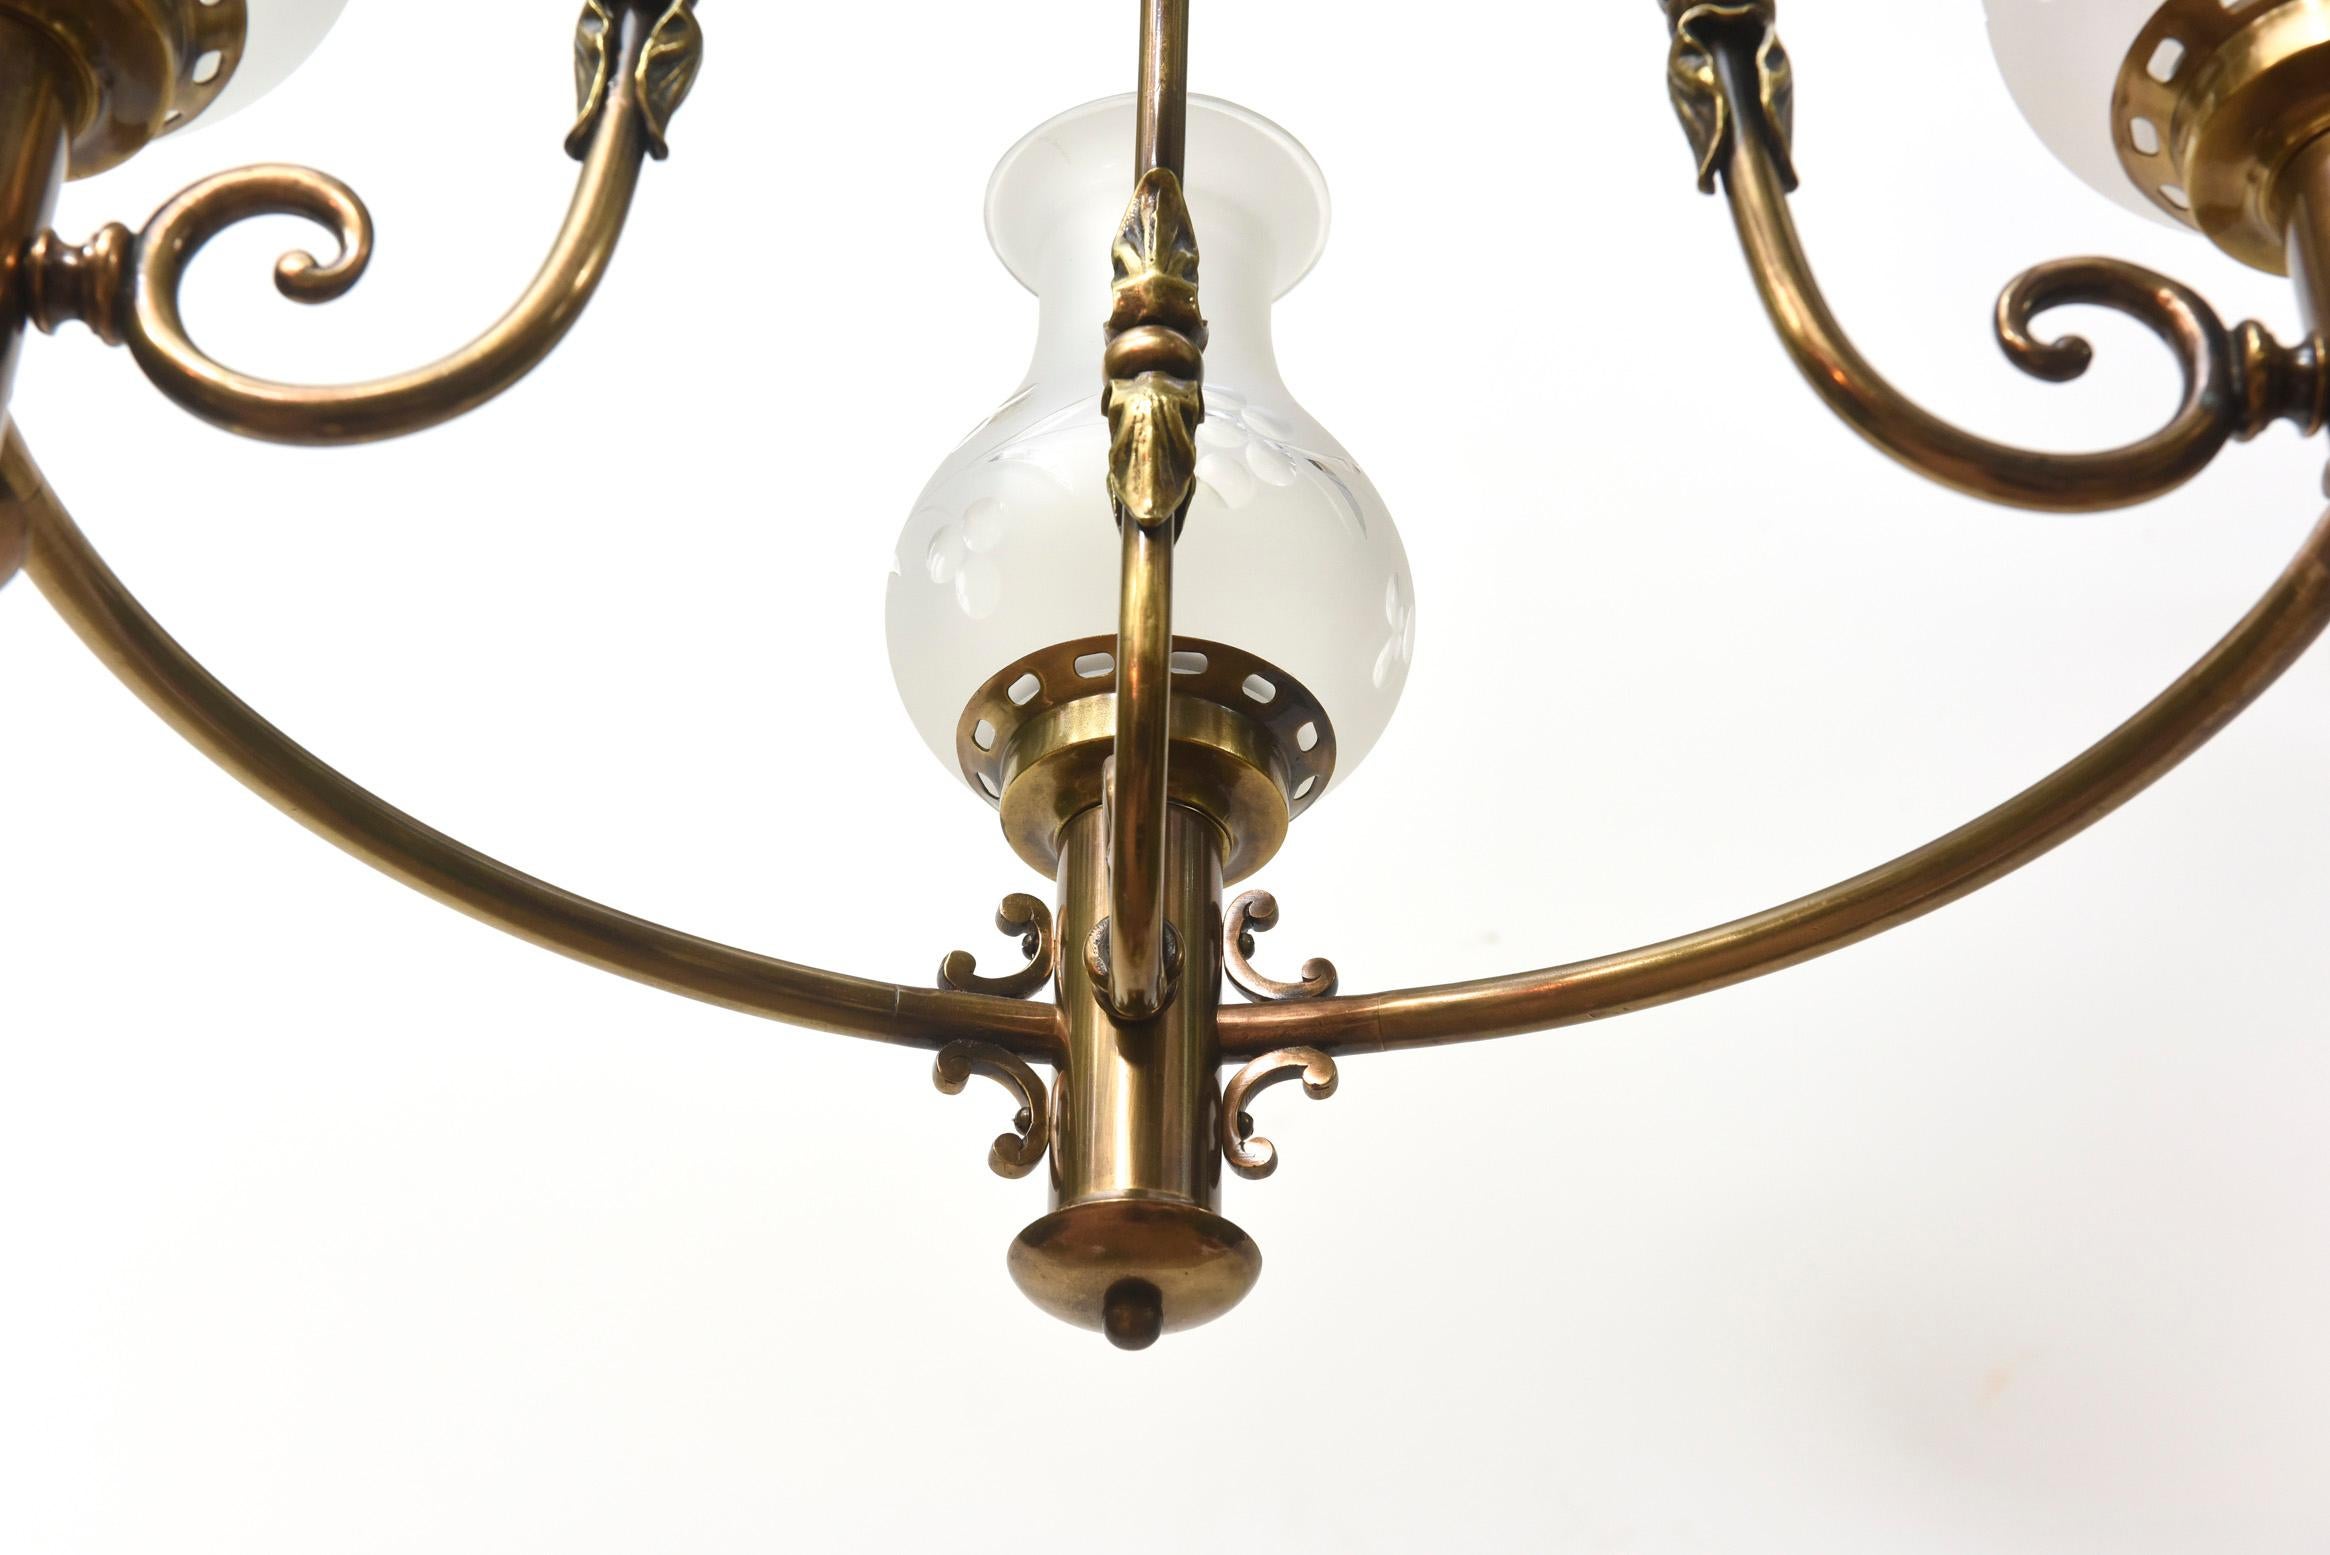 Four Light Colonial Revival Argand Oil Style chandelier. Original Glass. Completely restored and rewired. Ready to hang. Antique brass patina finish. American, C. 1915

Dimensions: 
Height: 28